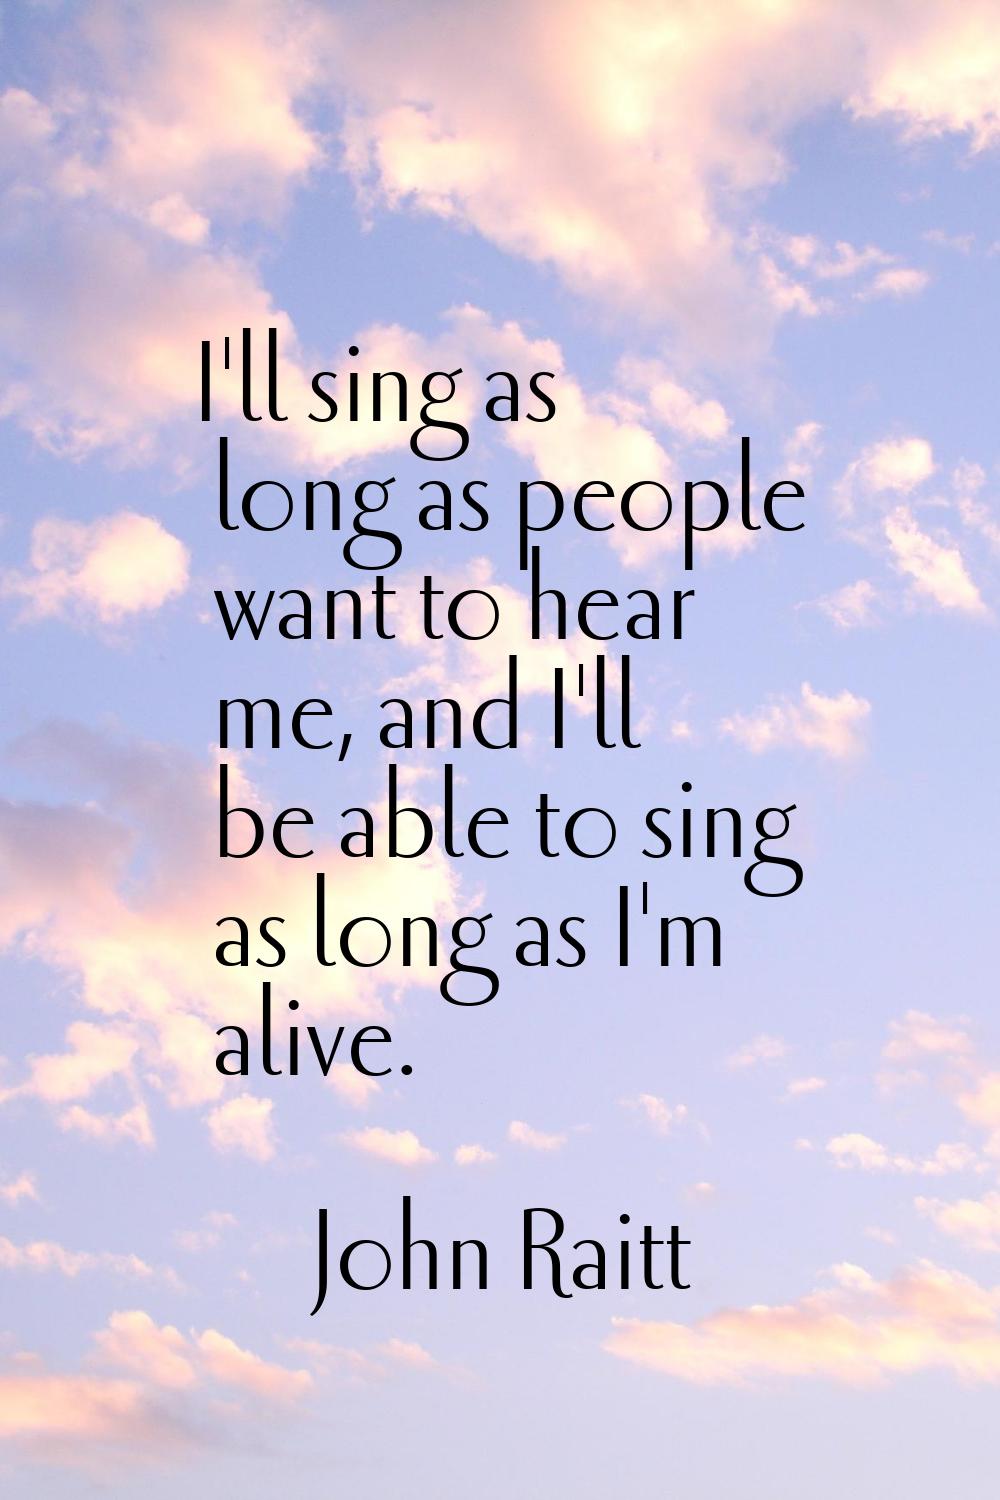 I'll sing as long as people want to hear me, and I'll be able to sing as long as I'm alive.